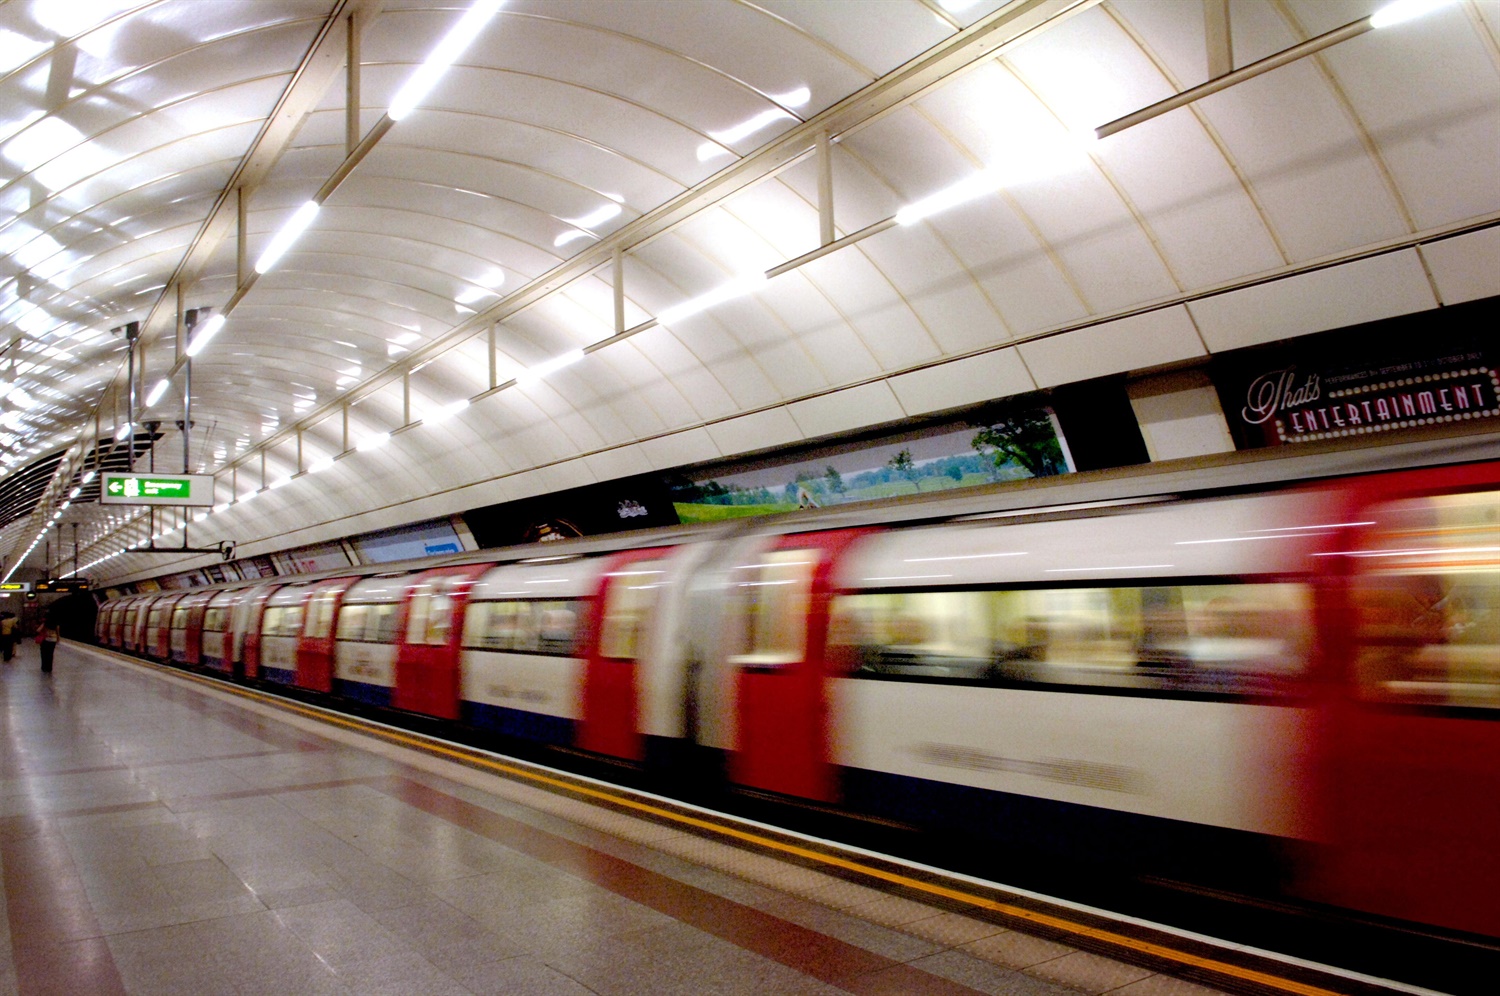 TfL issues £4.8m flooring contract for Piccadilly Line rolling stock